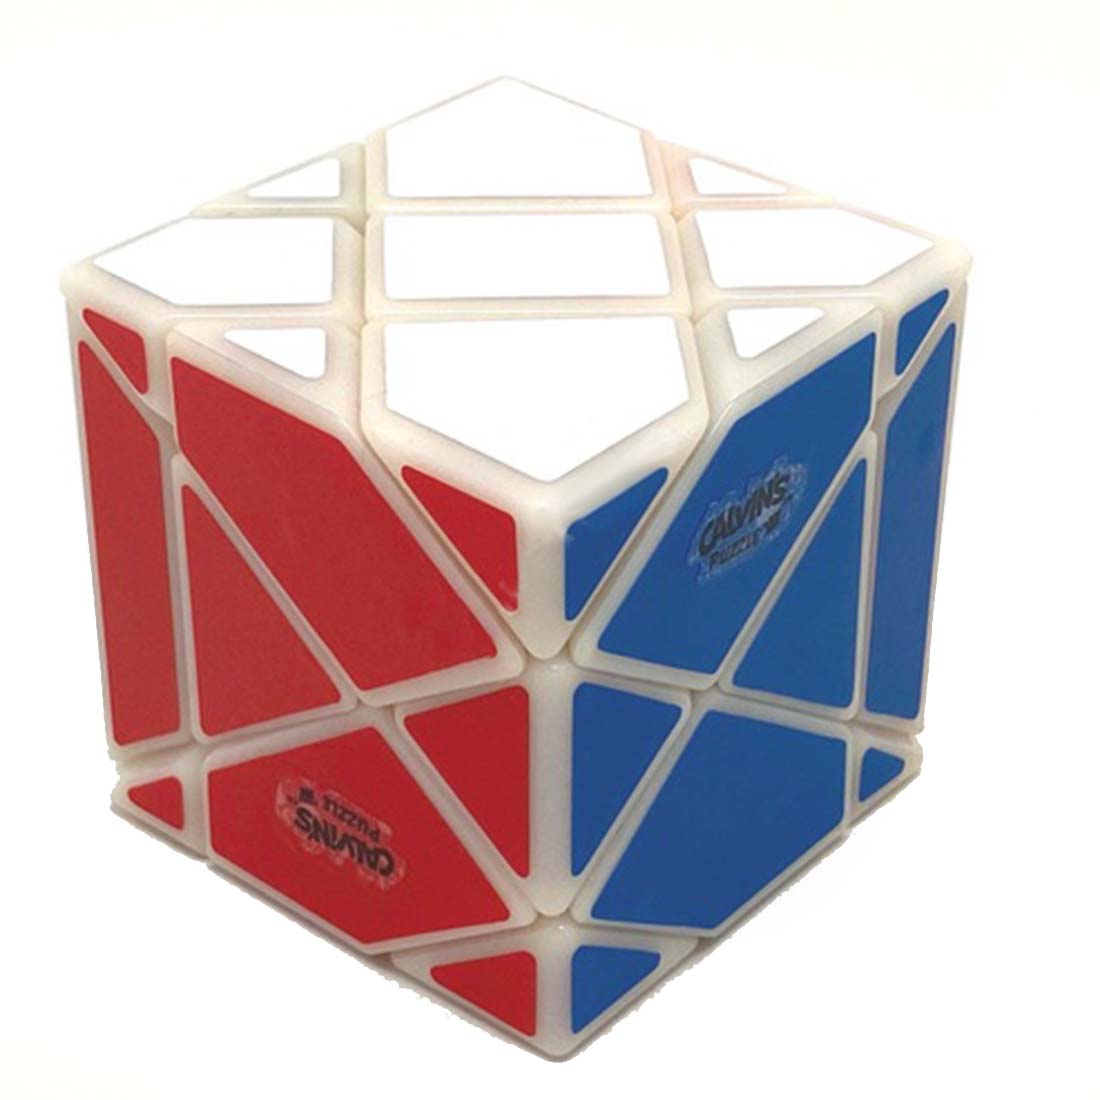 Calvin's Super Fisher 3x3 Speed Cube with 6-Color Stickers (White/Limited Edition)